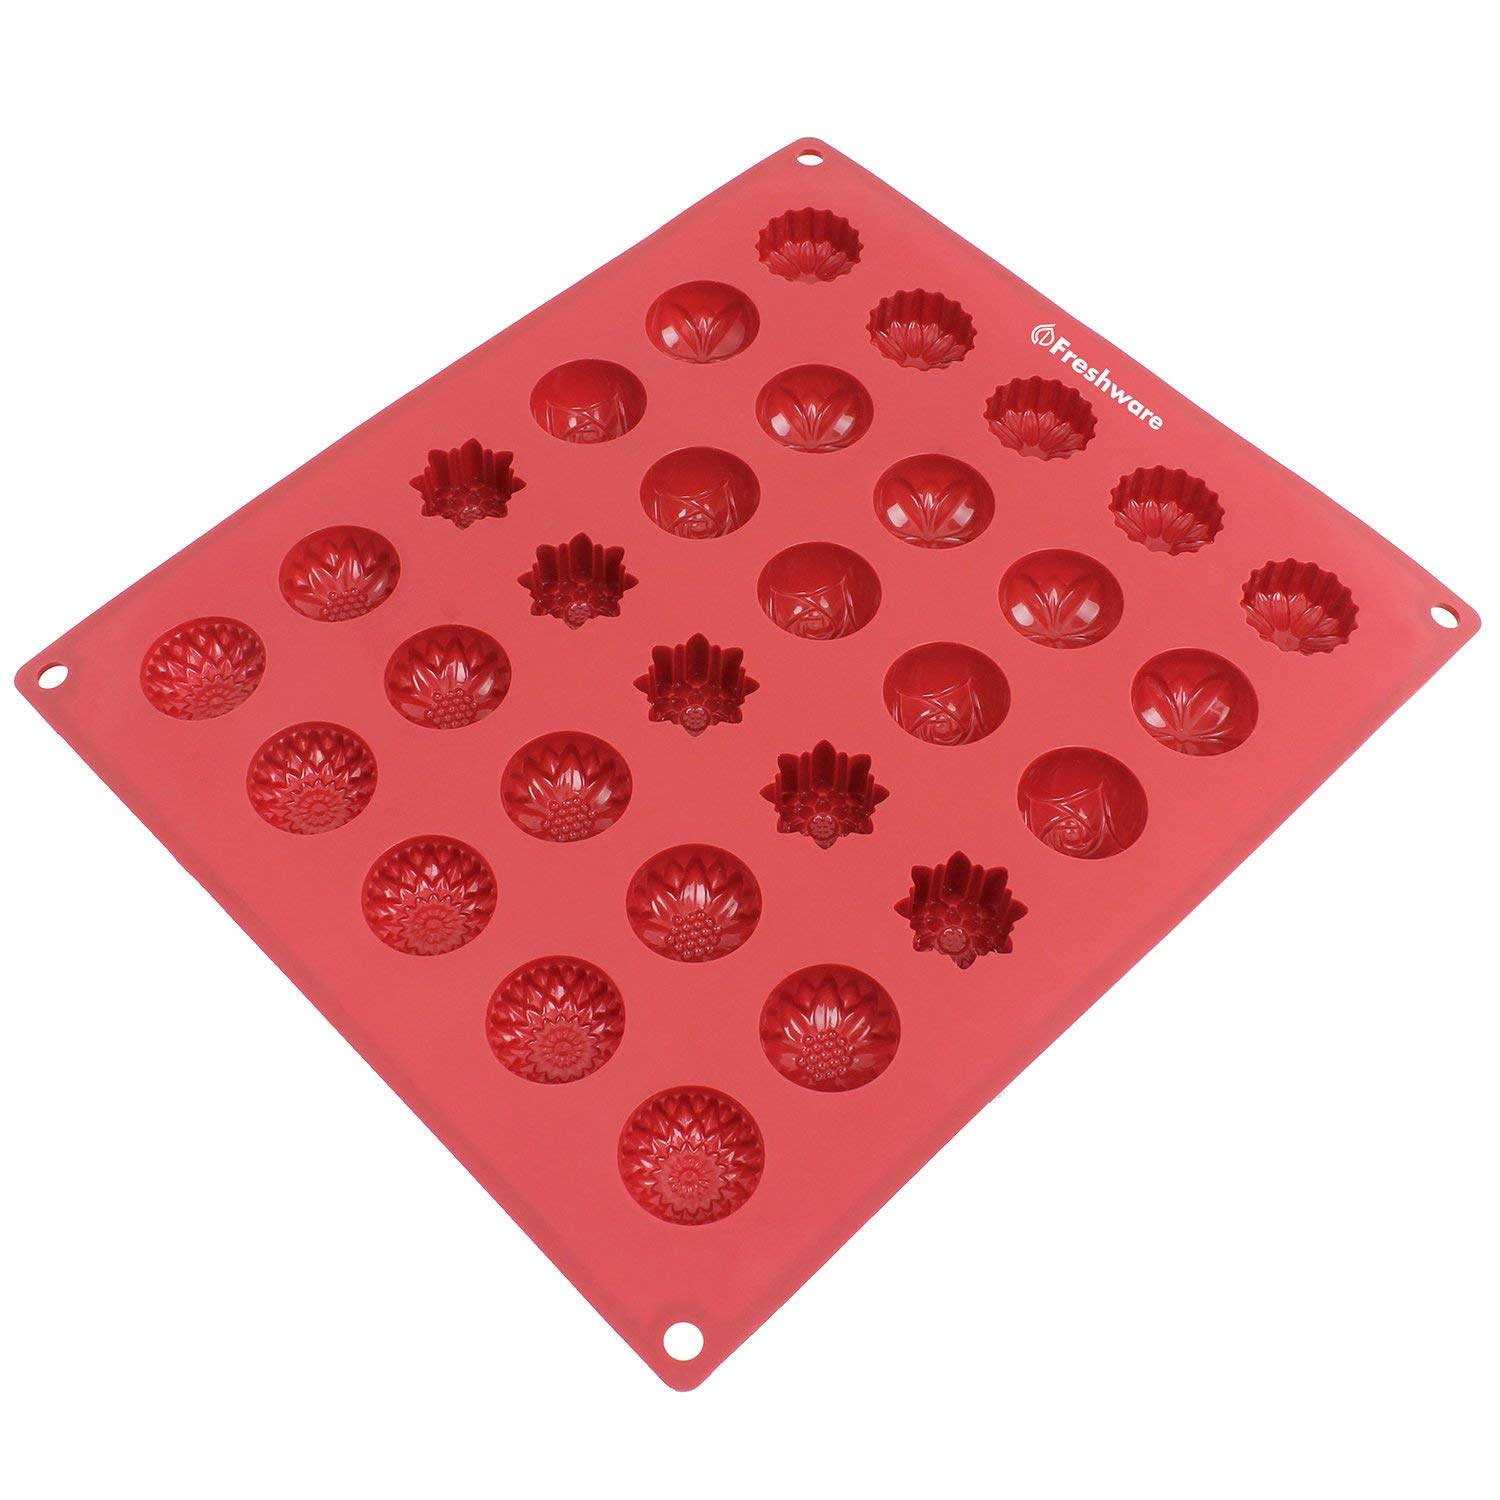 Silicone Chocolate Candy Molds [Flower, 30 Cup] - Non Stick, BPA Free, Reusable 100% Silicon & Dishwasher Safe Silicon - Kitchen Rubber Tray For Ice, Crayons, Fat Bombs and Soap Molds